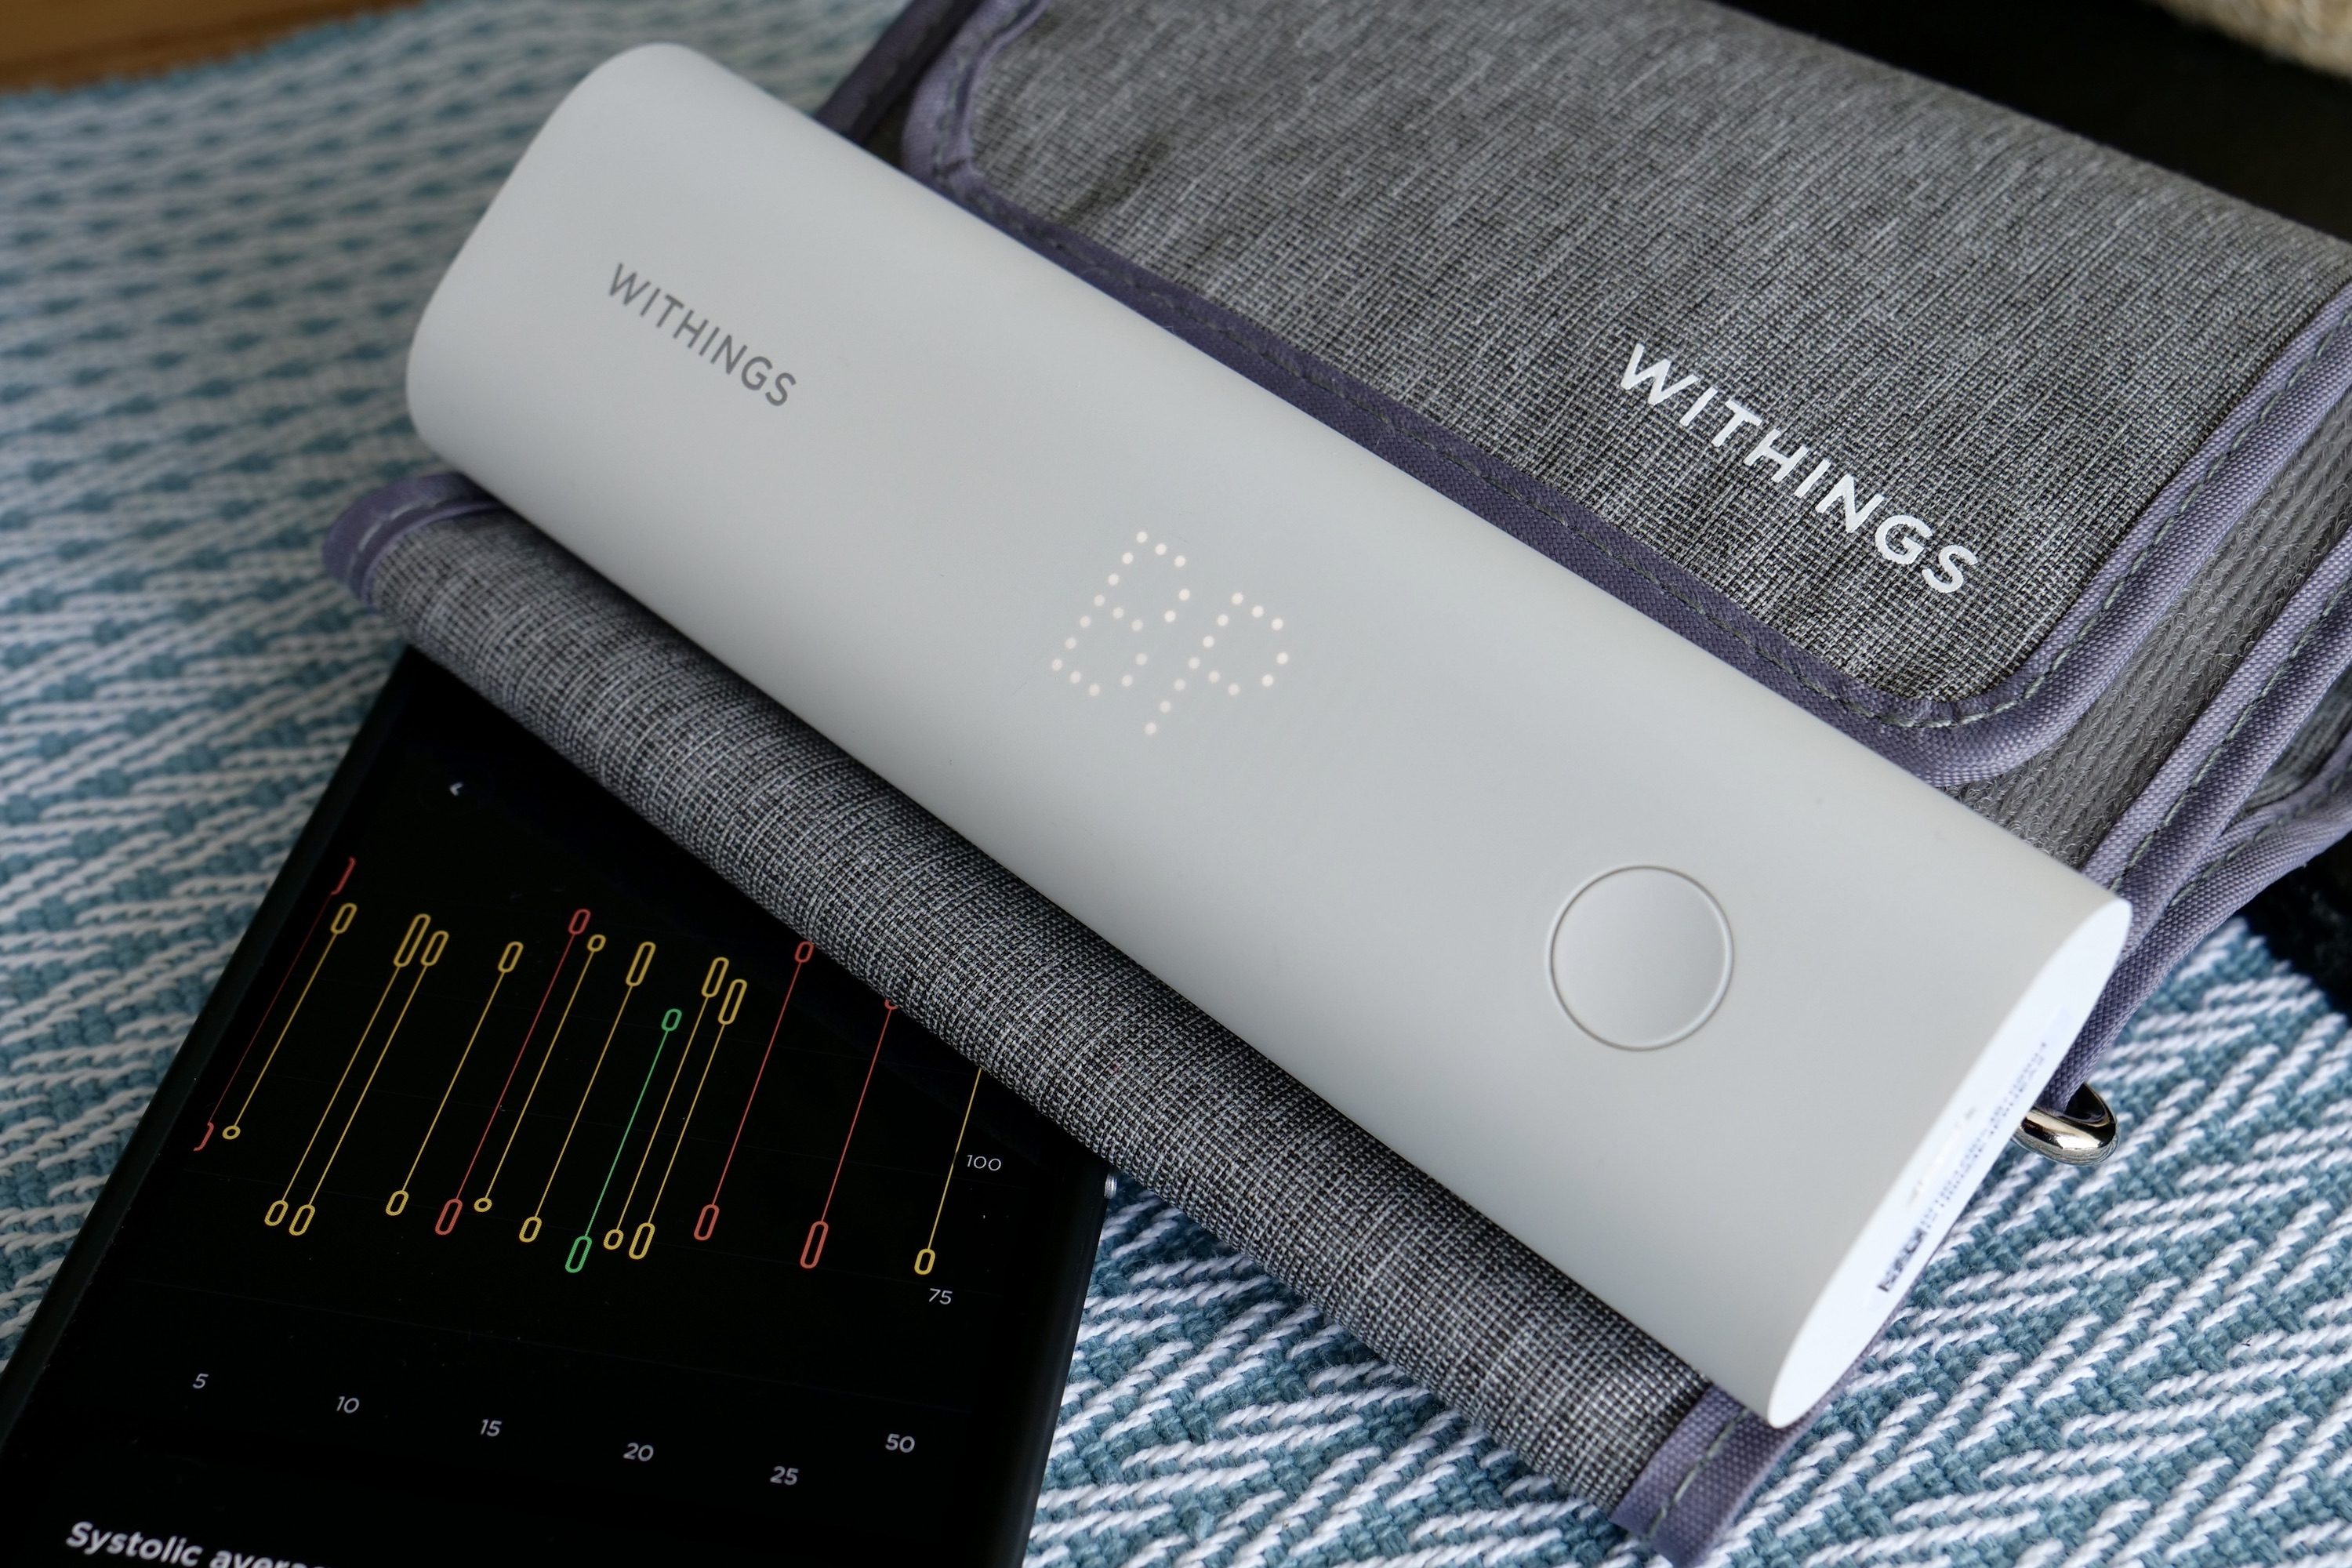 https://www.digitaltrends.com/wp-content/uploads/2023/05/Withings-BPM-Connect-and-App.jpg?fit=3000%2C2000&p=1